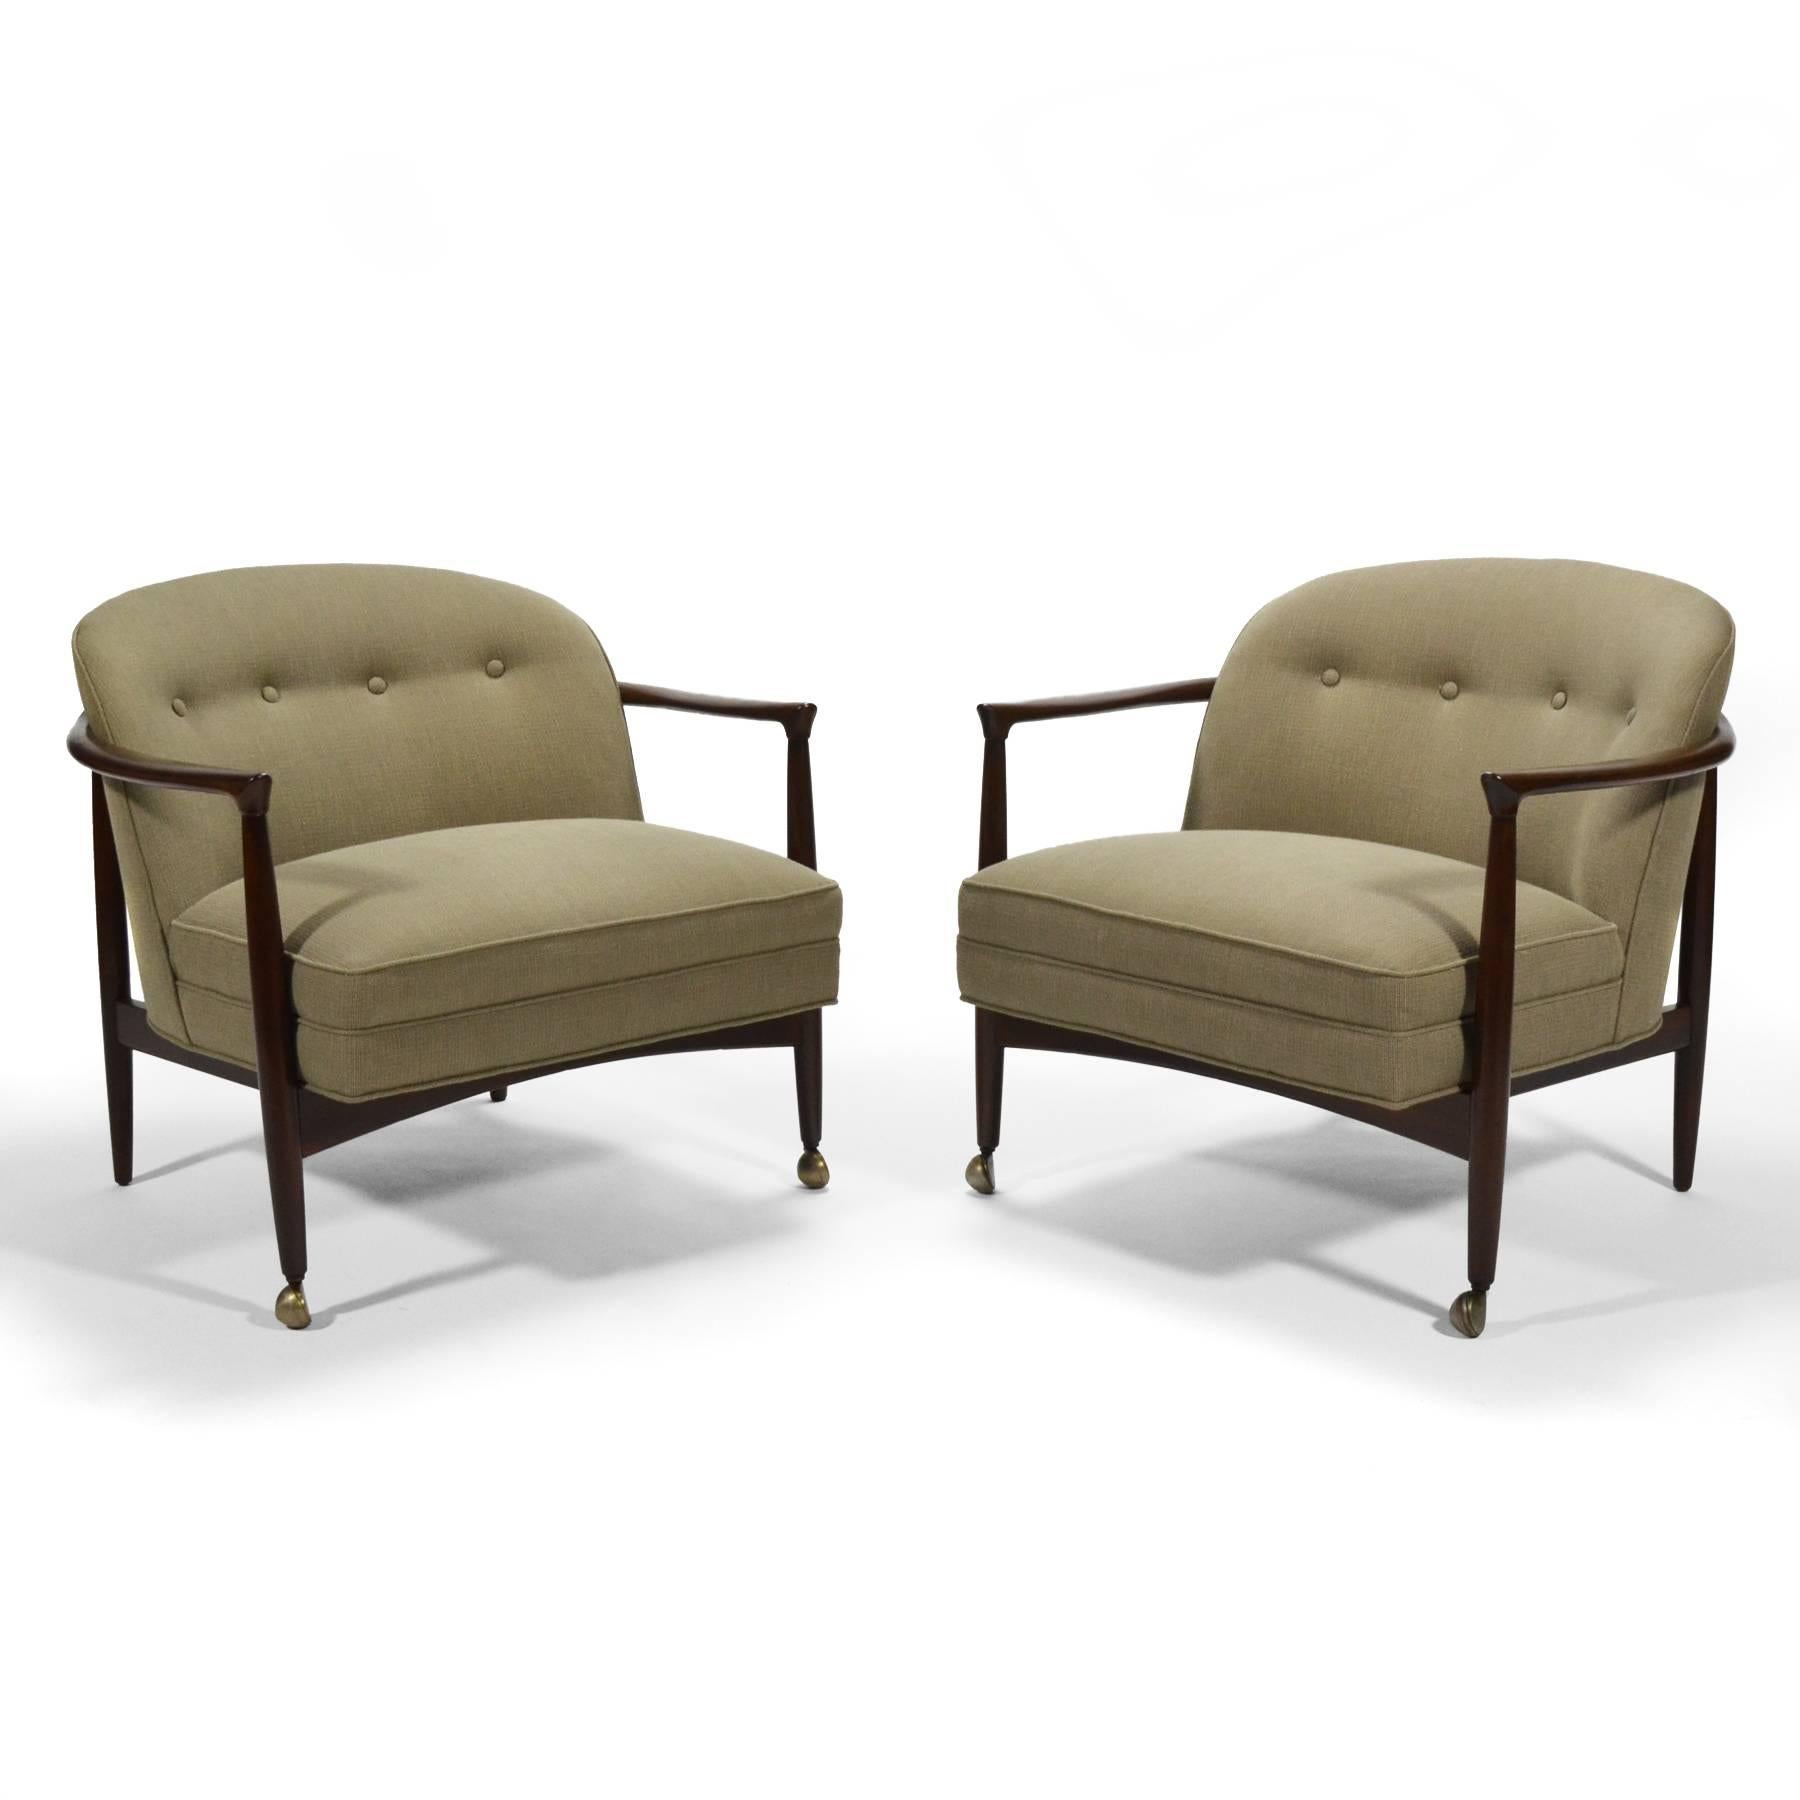 This design by finn Andersen features refined details and an exposed wood frame with lovely sculptural details supporting an upholstered seat. It references barrel-back club chairs and has casters under the front legs which is a detail that Edward